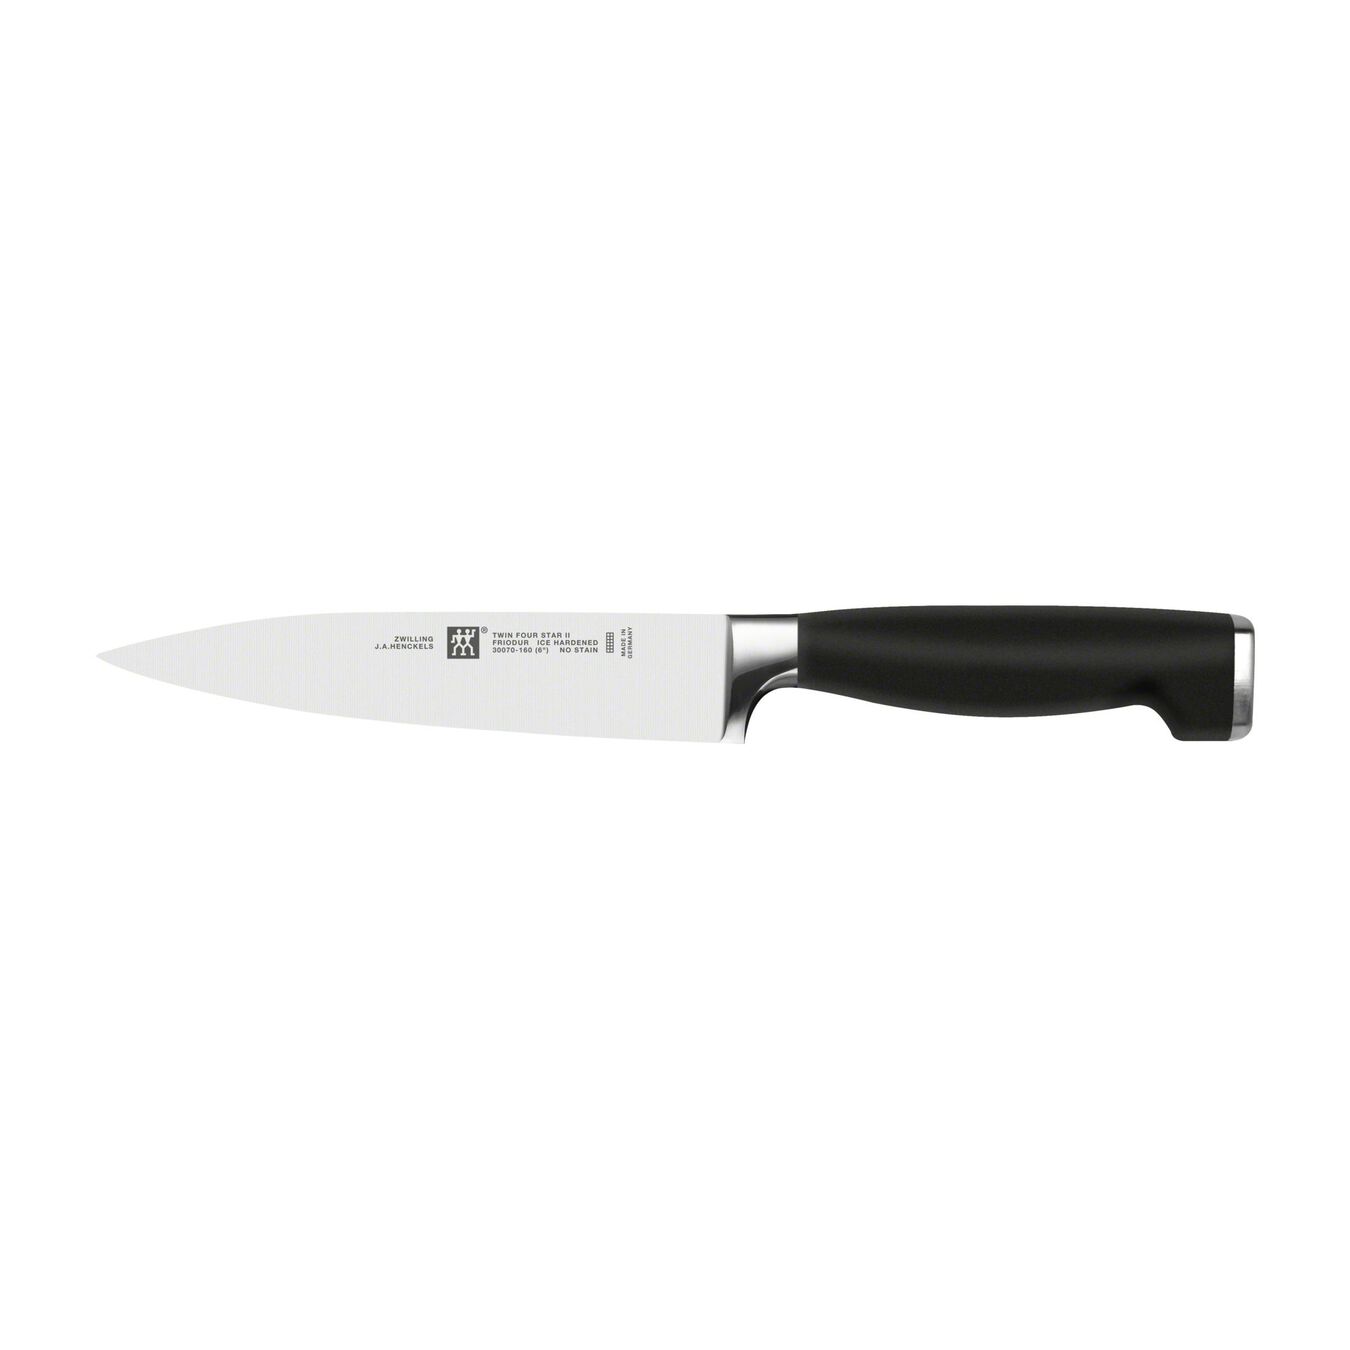 6.5 inch Carving knife - Visual Imperfections,,large 2